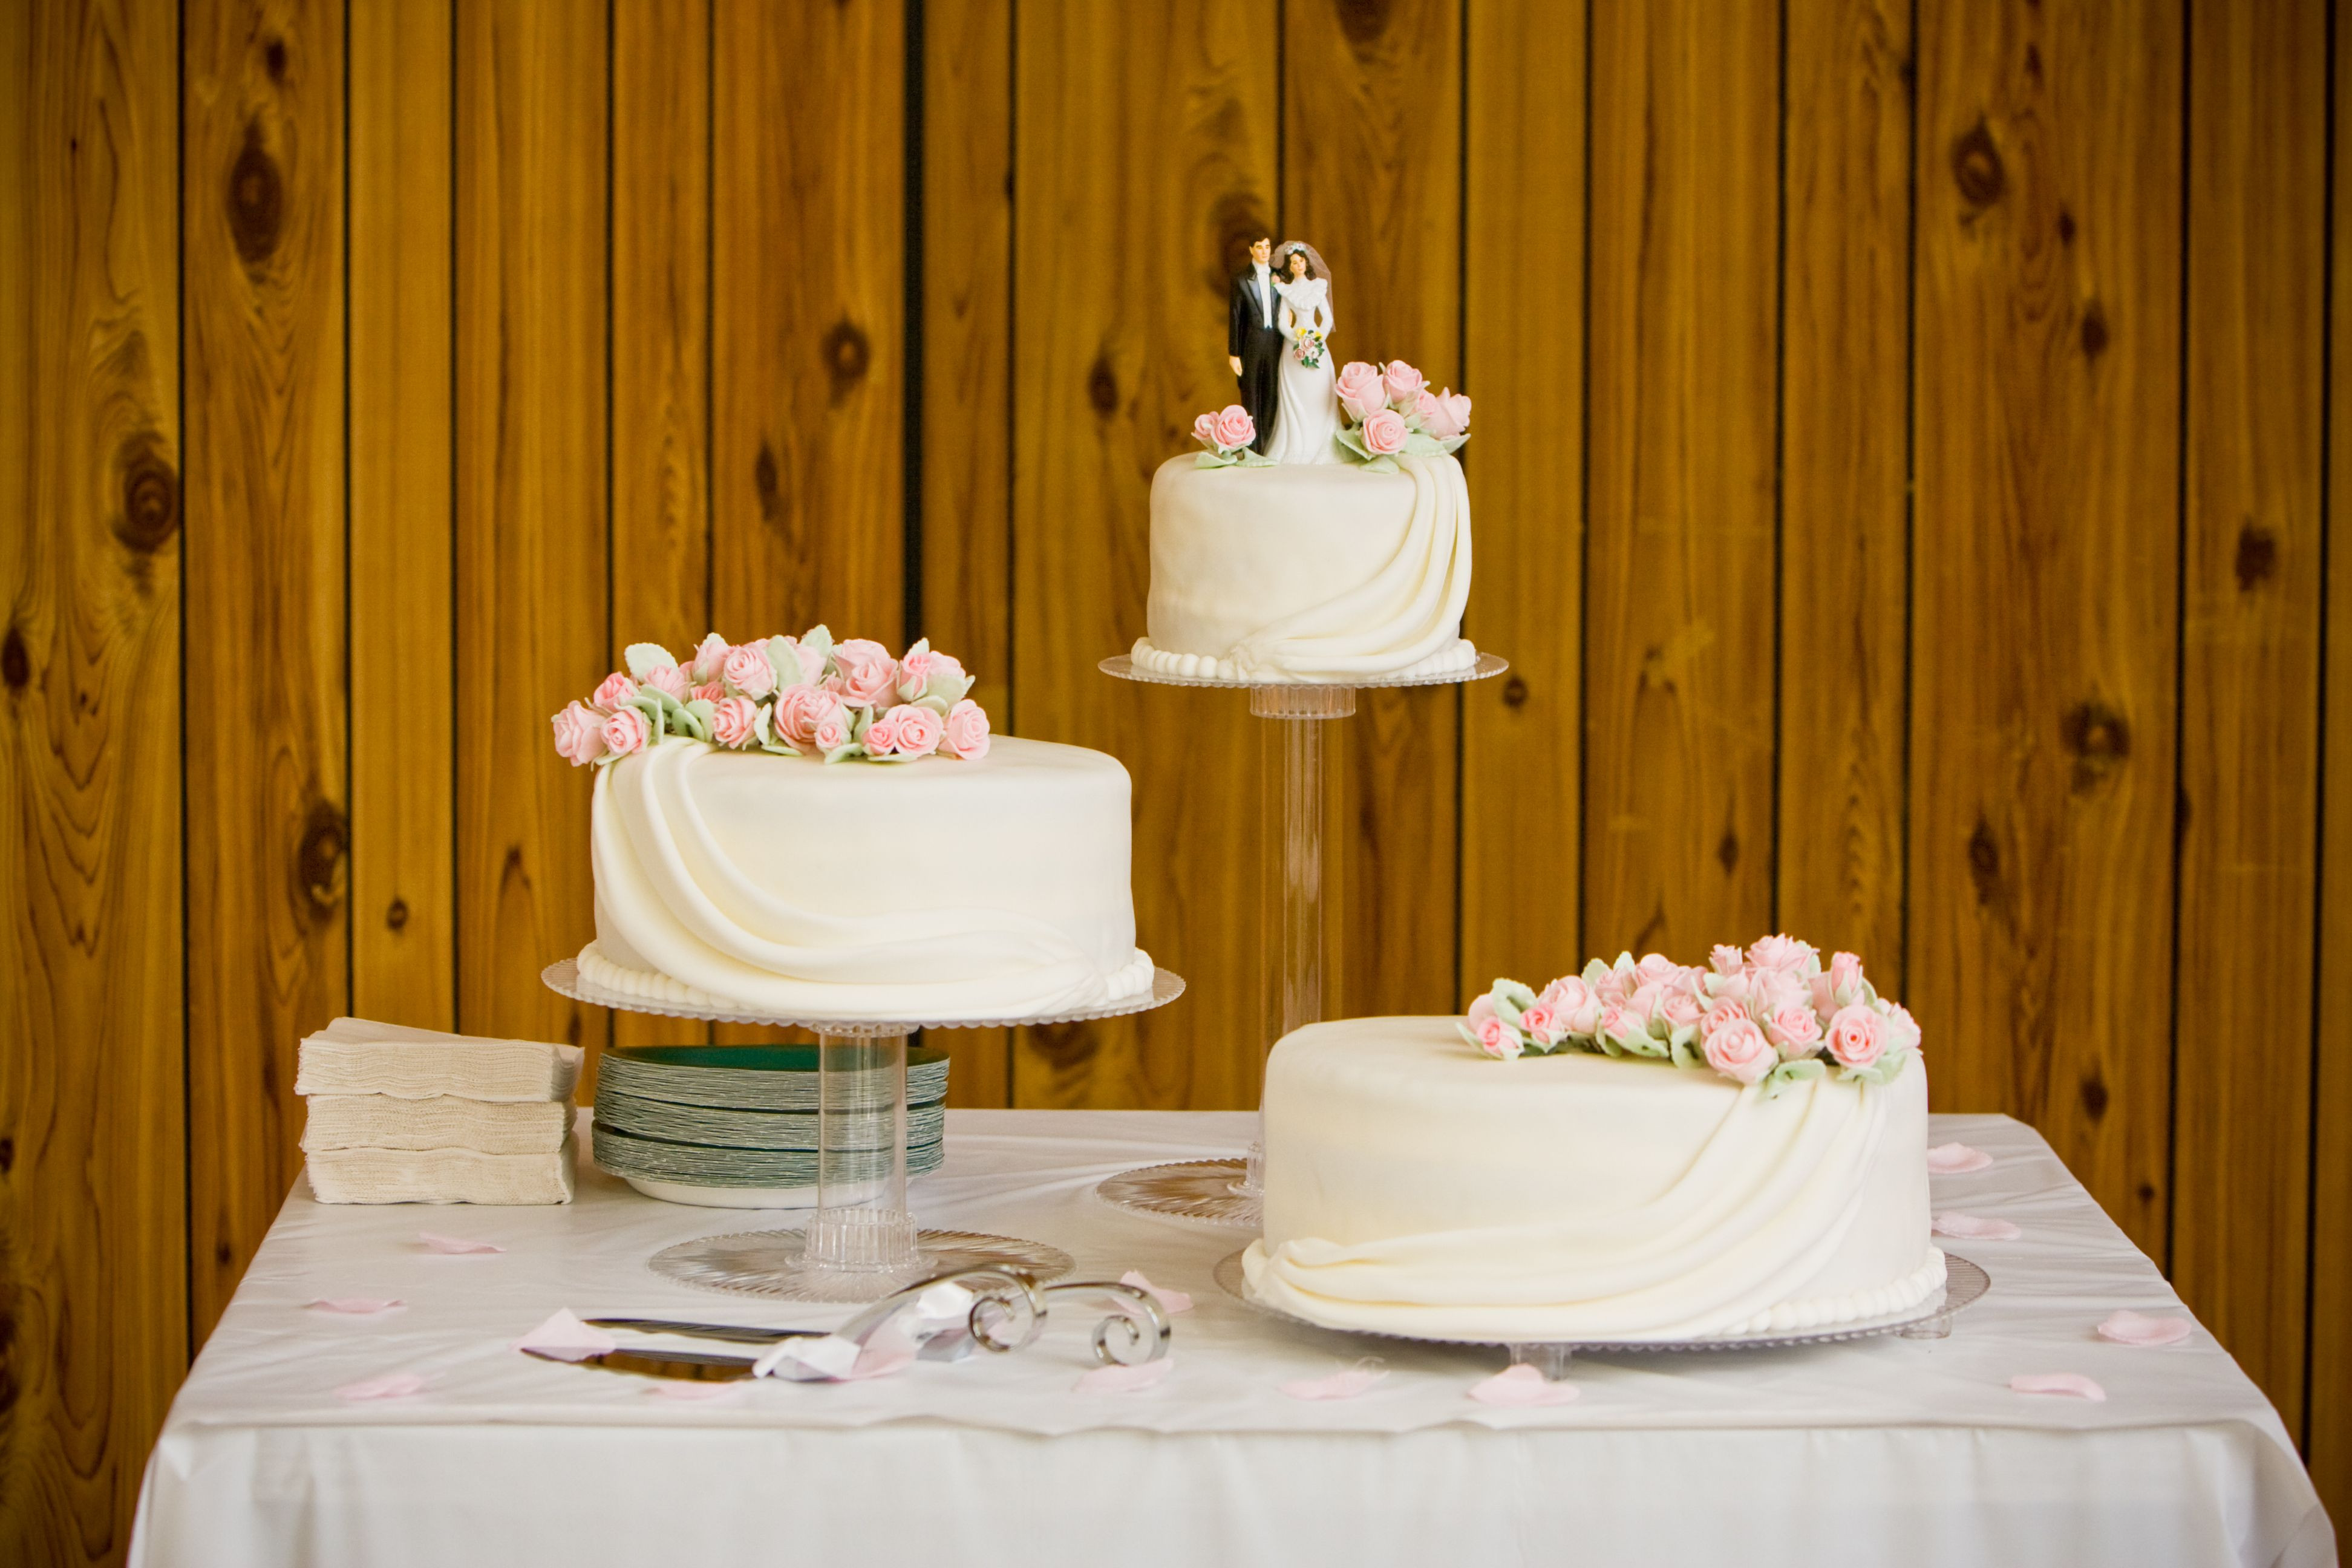 Separate Tier Wedding Cakes
 wedding cakes with separate tiers